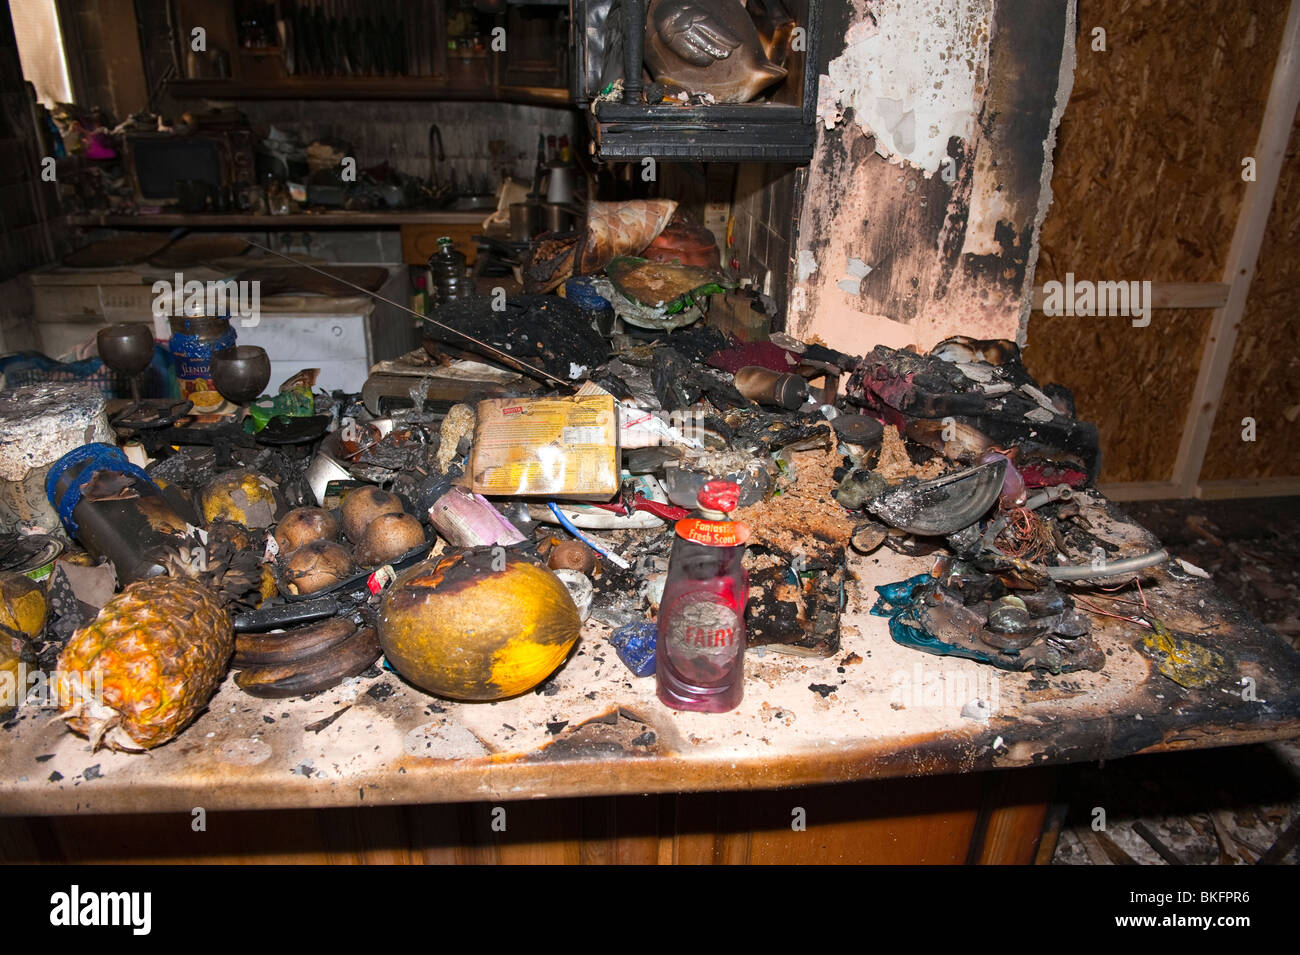 Kitchen food and units severely damaged following domestic house kitchen fire Stock Photo